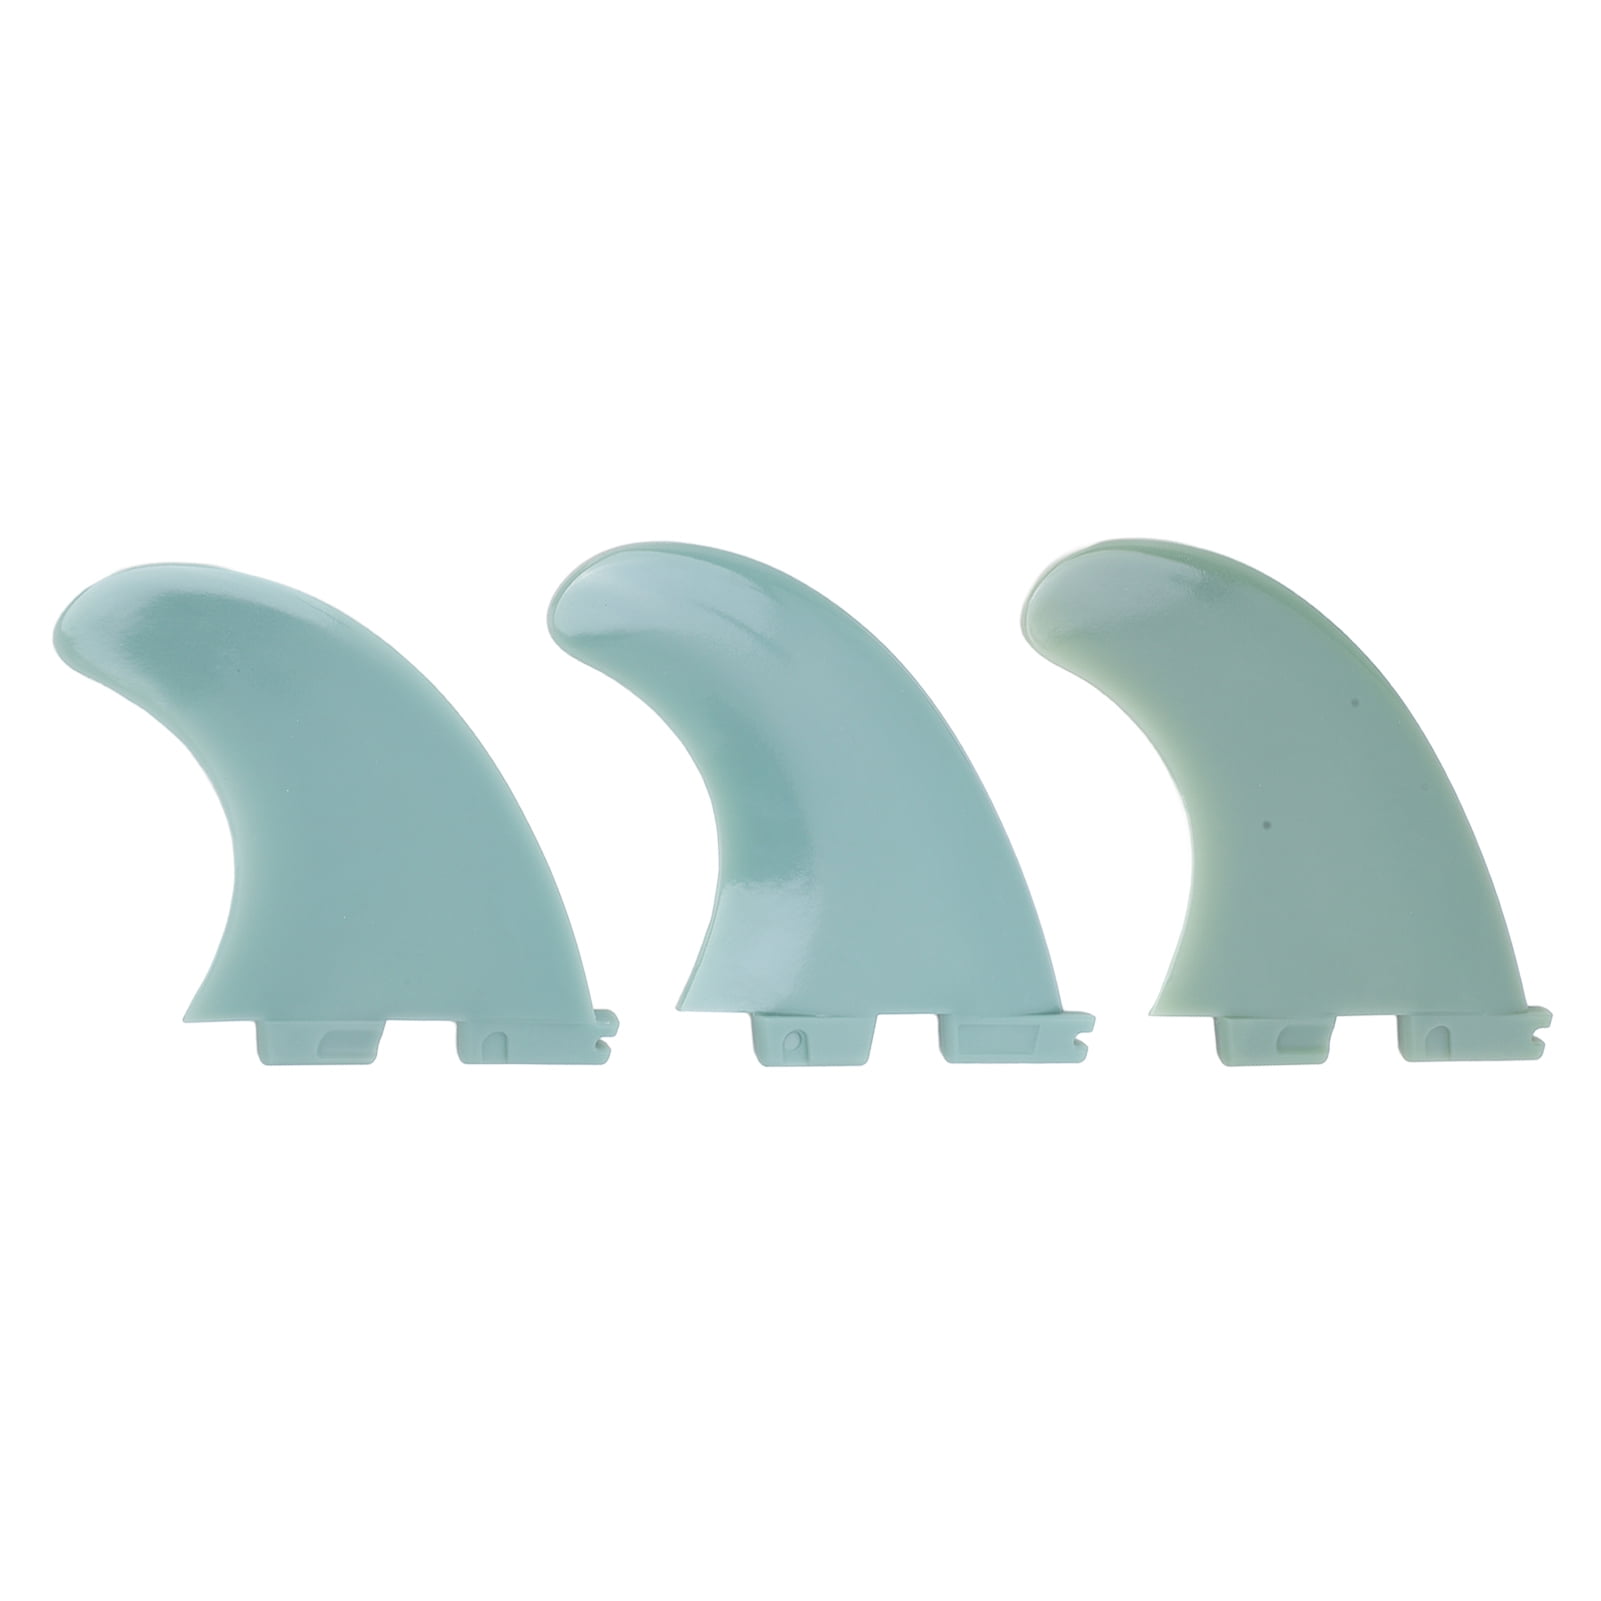 3Pcs Surfboard Fins,Durable Surfboard Fin Surf Boards Accessory Water Diversion Left Middle Right for FCS Fin Surfboard 